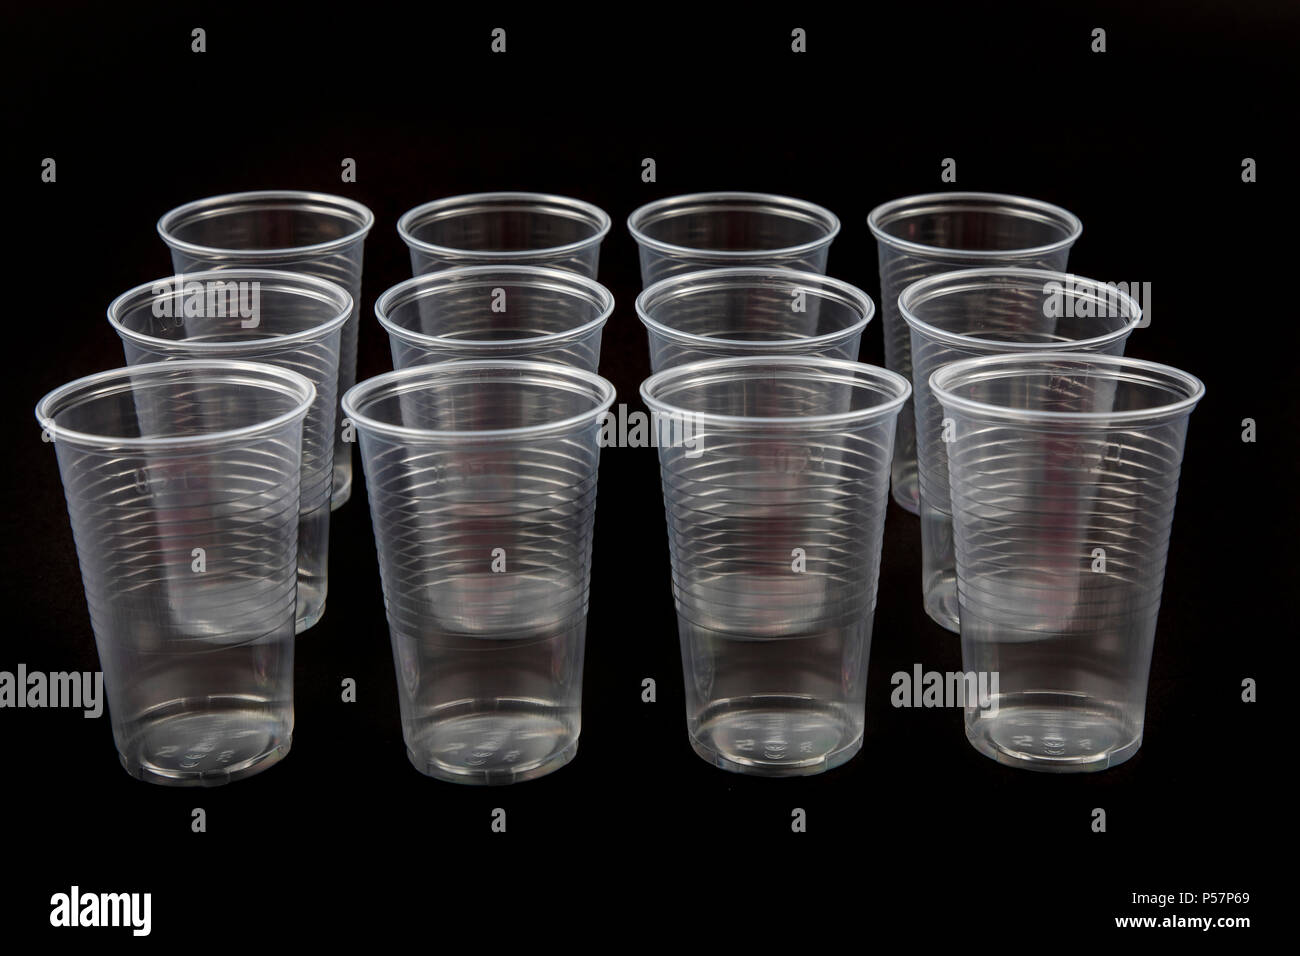 Plastic cup, in white, 0.2 liter, drinking cup, disposable cup, plastic waste, clear, Stock Photo